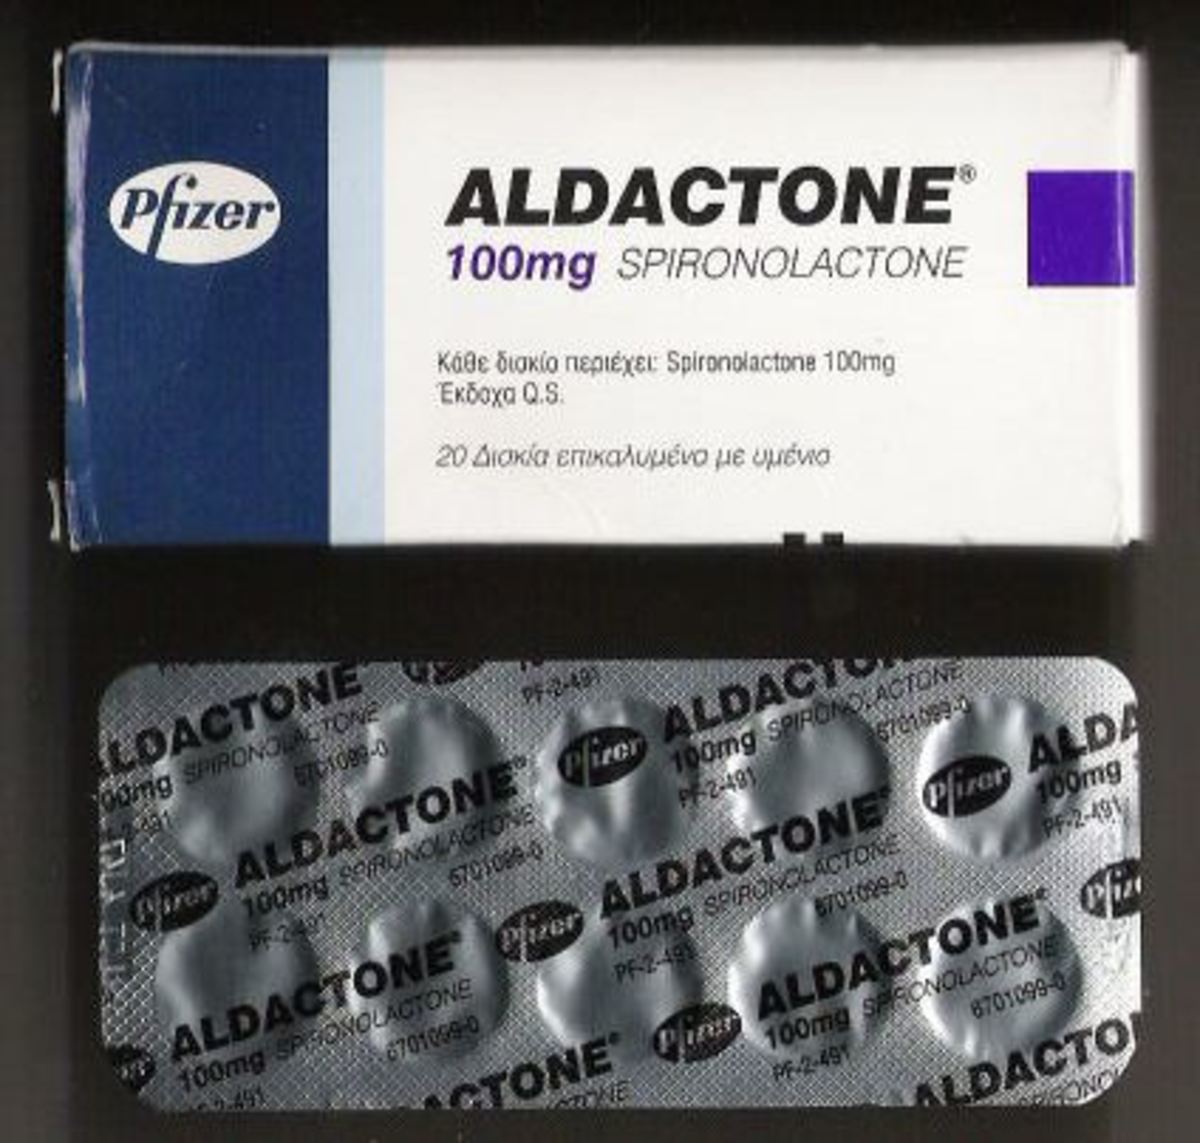 Foods to avoid while taking Aldactone